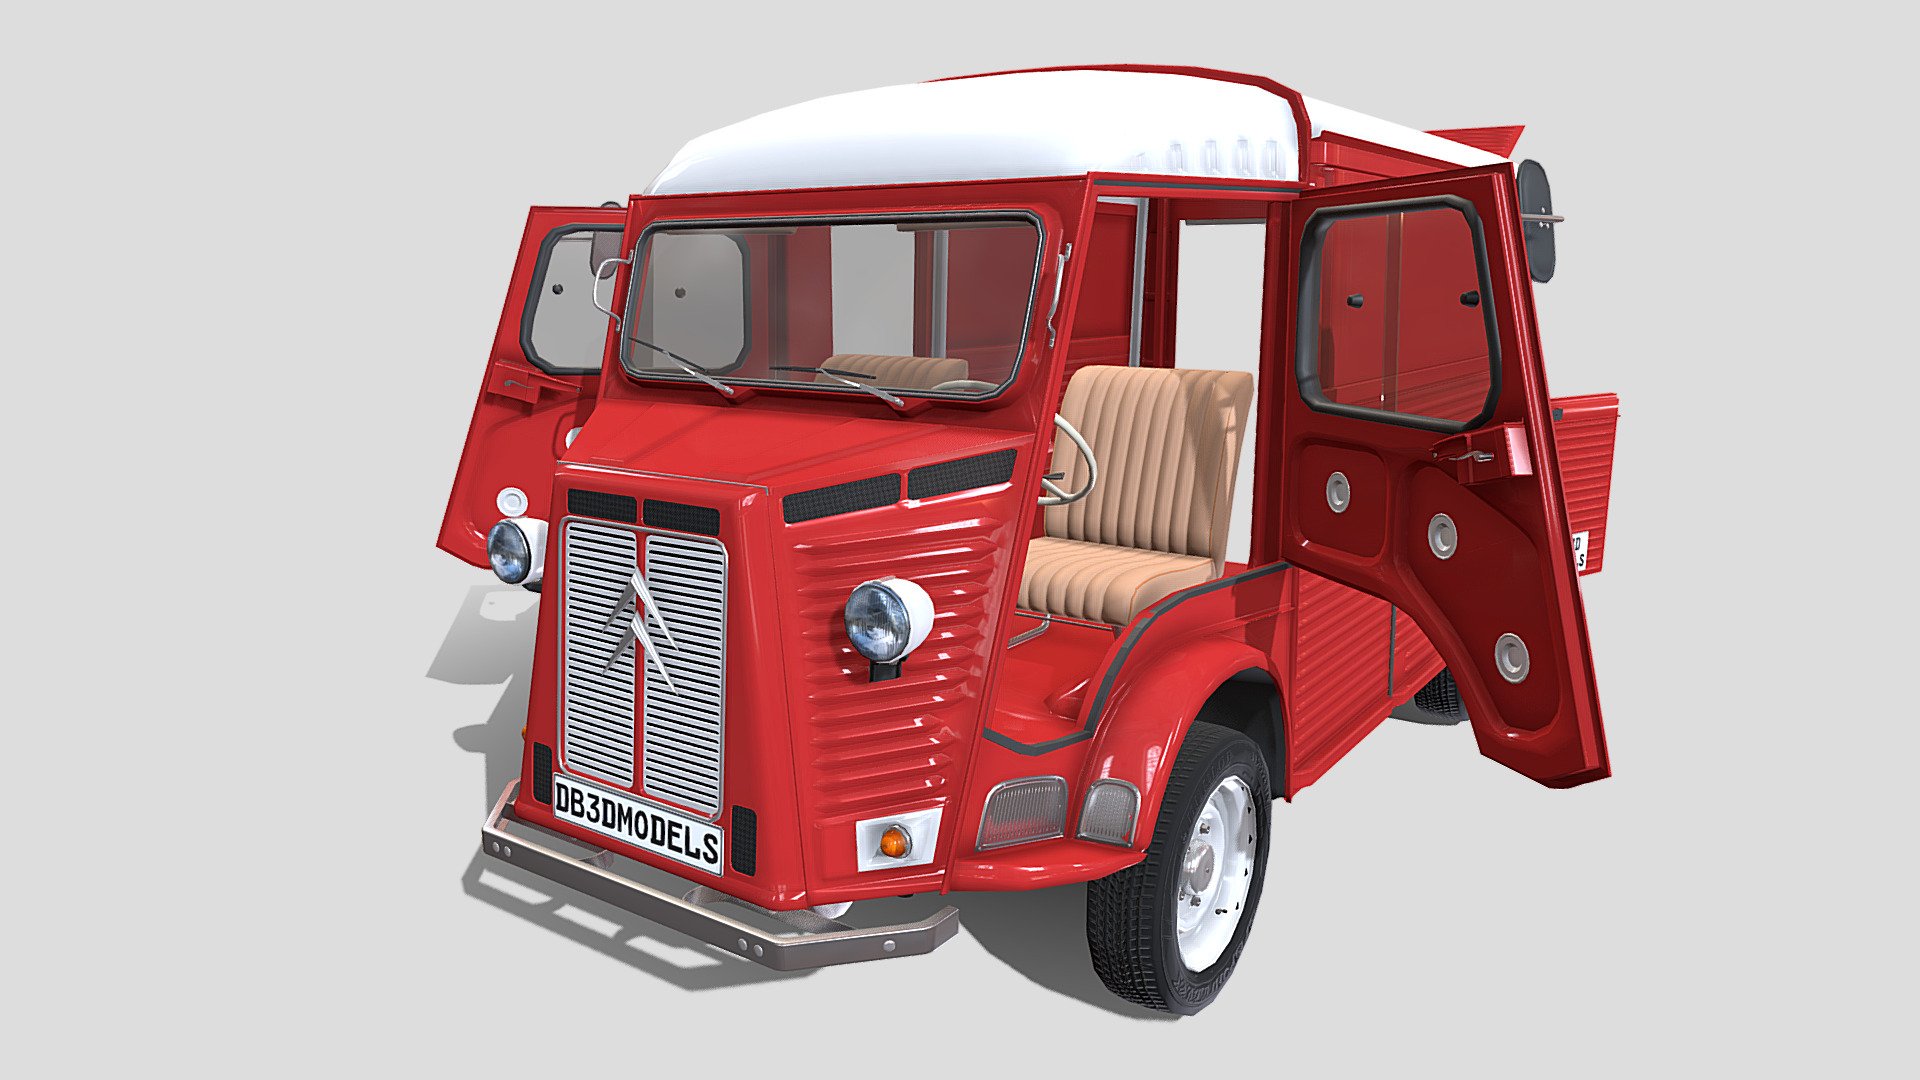 Highly detailed Citroen HY 3D model rendered with Cycles in Blender, as per seen on attached images.

The model is very intricately built, it has the interior modeled, with the rear cargo area, and a simple underbody built as well. 

The 3d model is scaled to original size in Blender.

File formats:

-.blend, rendered with cycles, as seen in the images;

-.blend, rendered with cycles, as seen in the images, with doors open;

-.obj, with materials applied;

-.obj, with materials applied, with doors open;

-.dae, with materials applied;

-.dae, with materials applied, with doors open;

-.fbx, with materials applied;

-.fbx, with materials applied, with doors open;

-.stl;

-.stl, with doors open;

Files come named appropriately and split by file format.

3D Software:

The 3D model was originally created in Blender 3.1 and rendered with Cycles 3d model